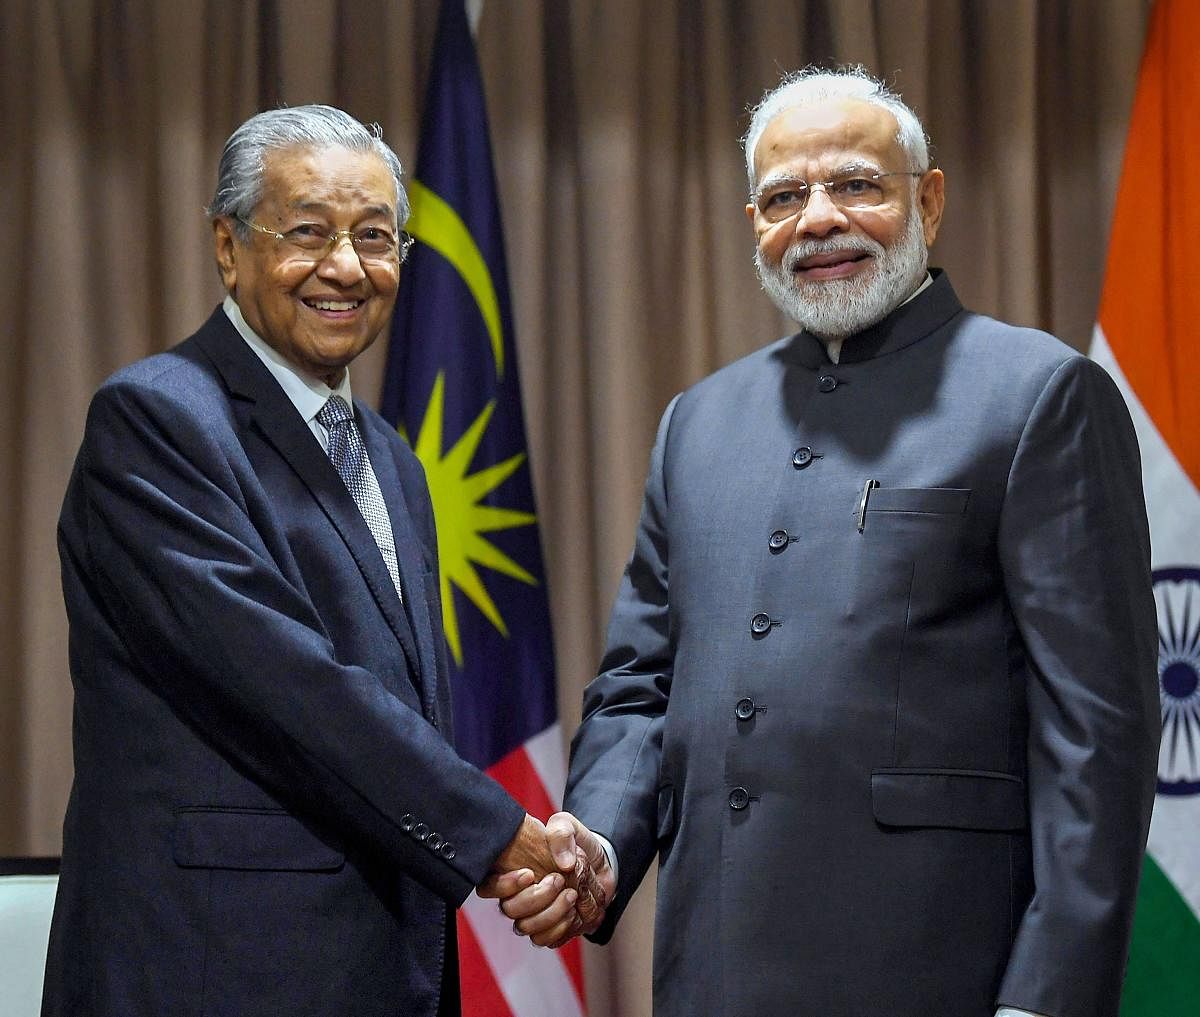 Prime Minister Narendra Modi shakes hands with his Malaysian counterpart Dr. Mahathir Mohamad. (PIB?PTI Photo)